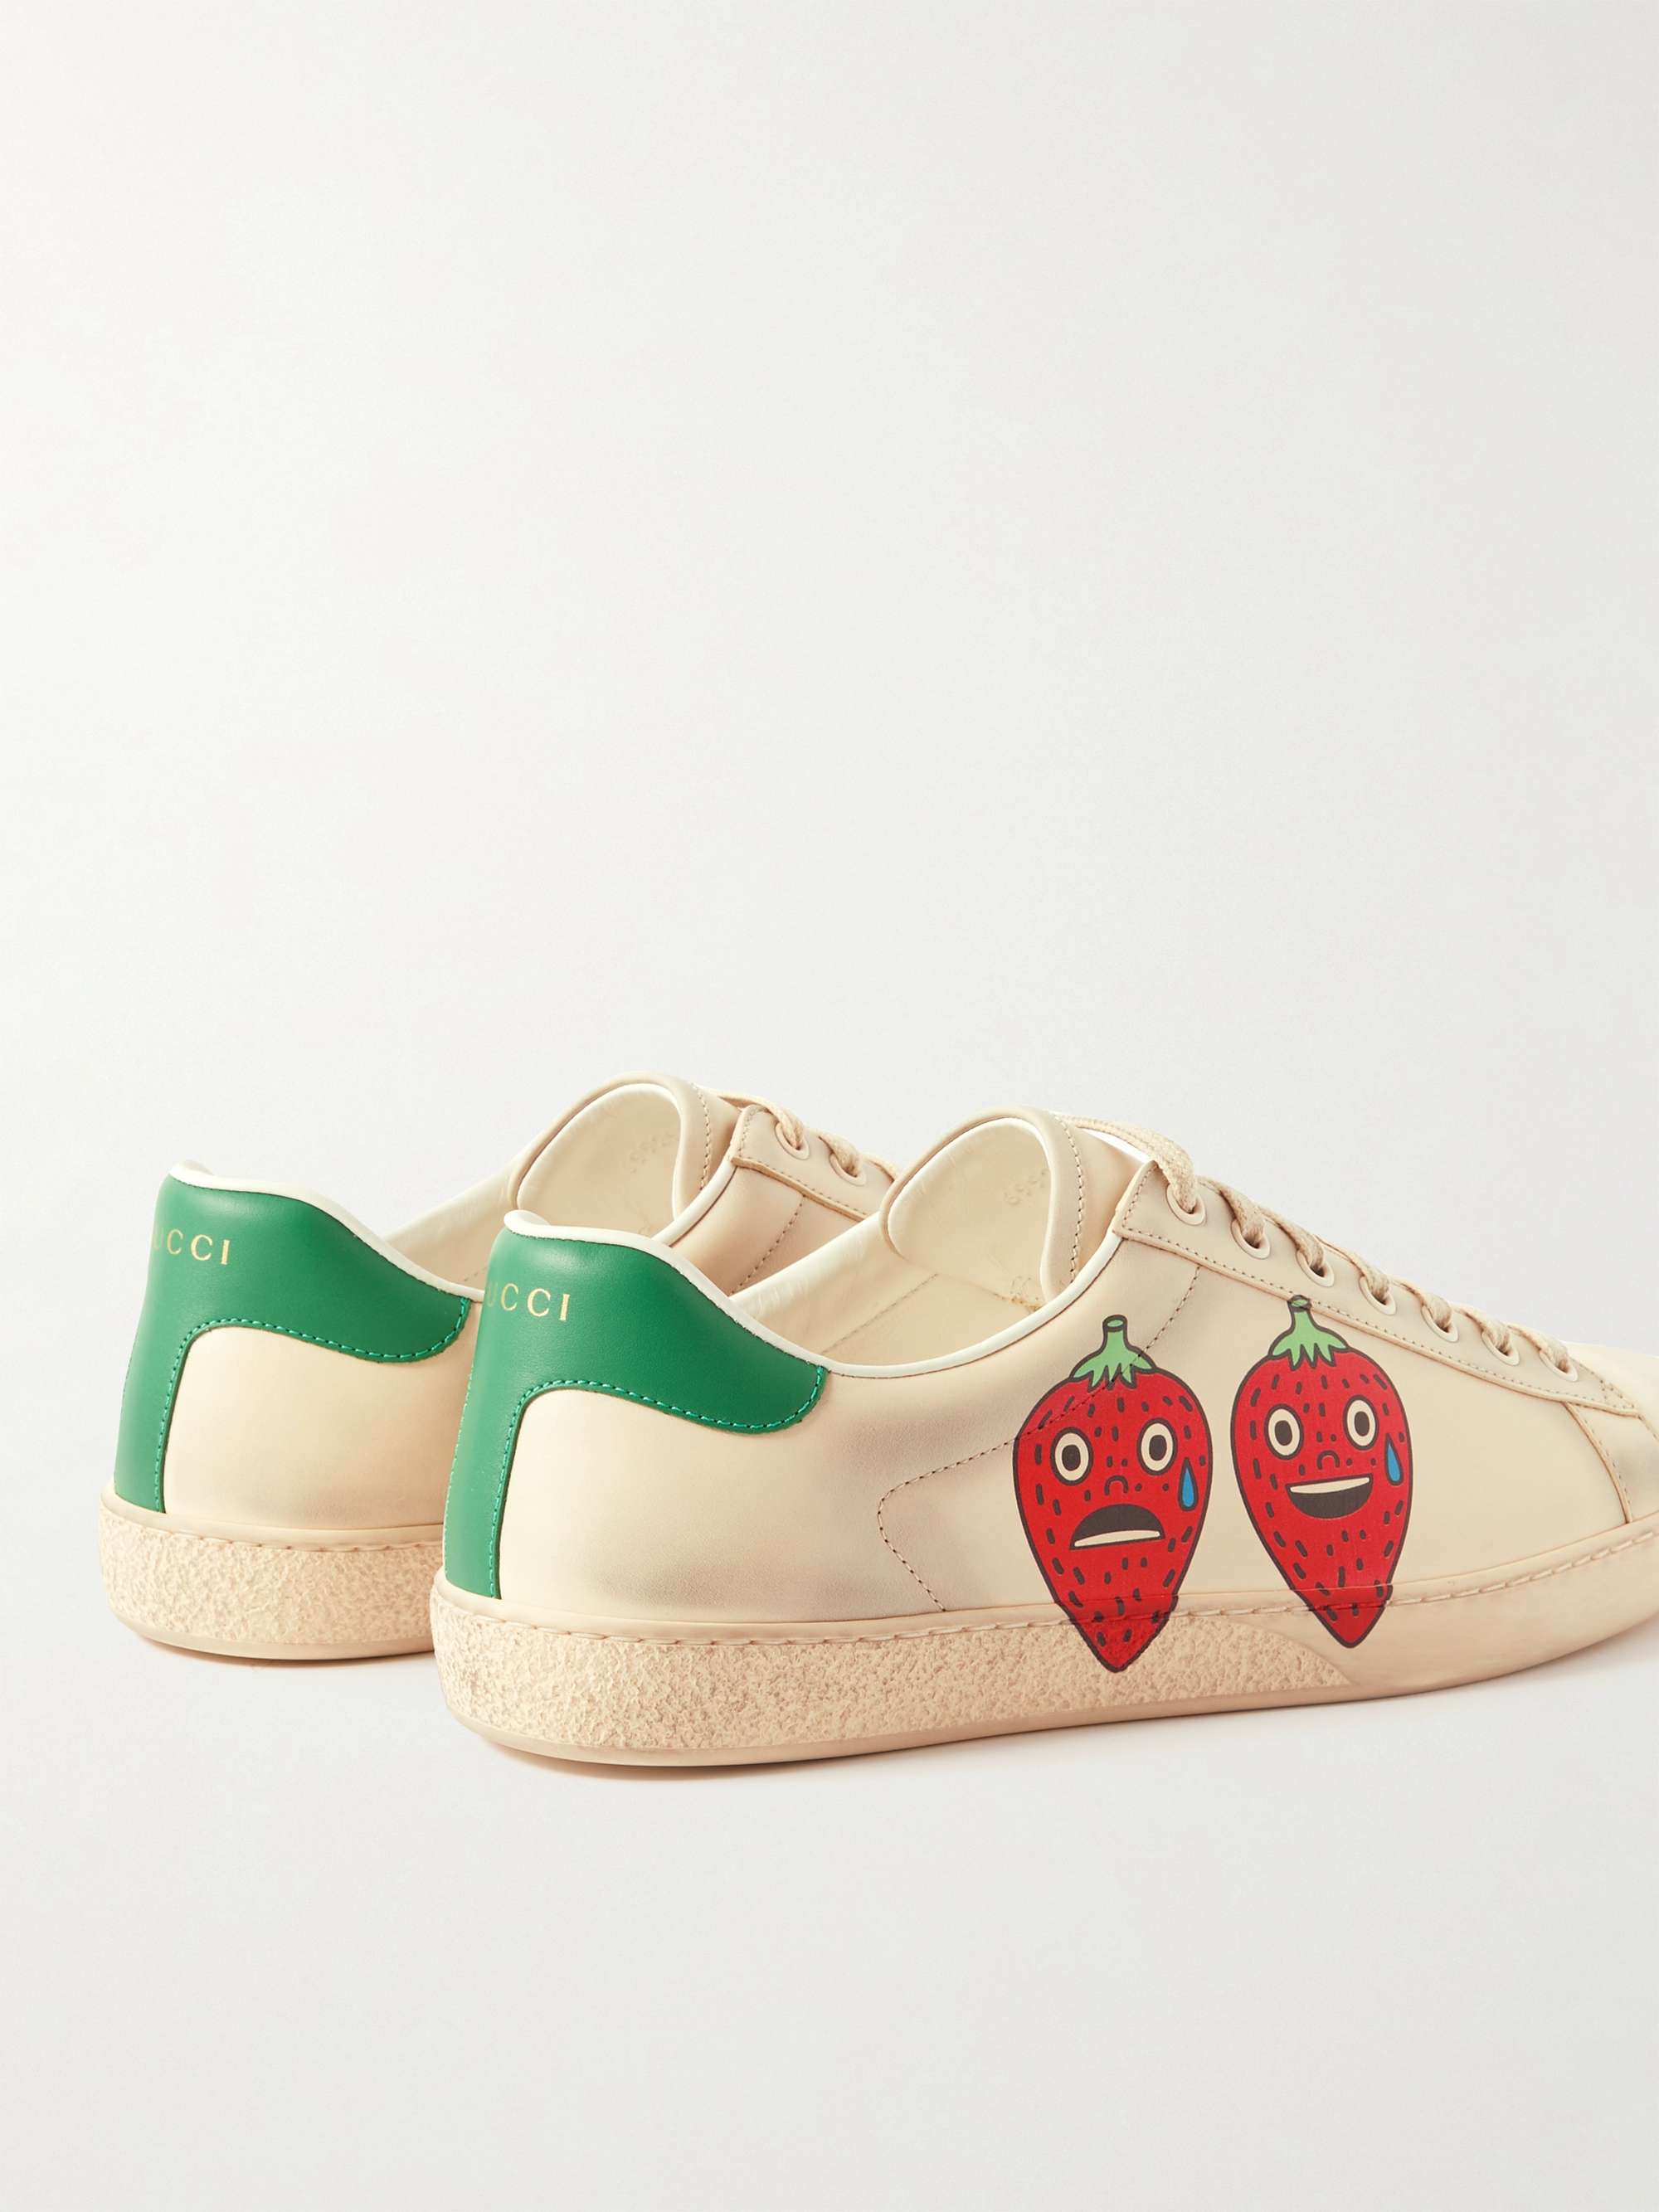 GUCCI New Ace Printed Leather Sneakers